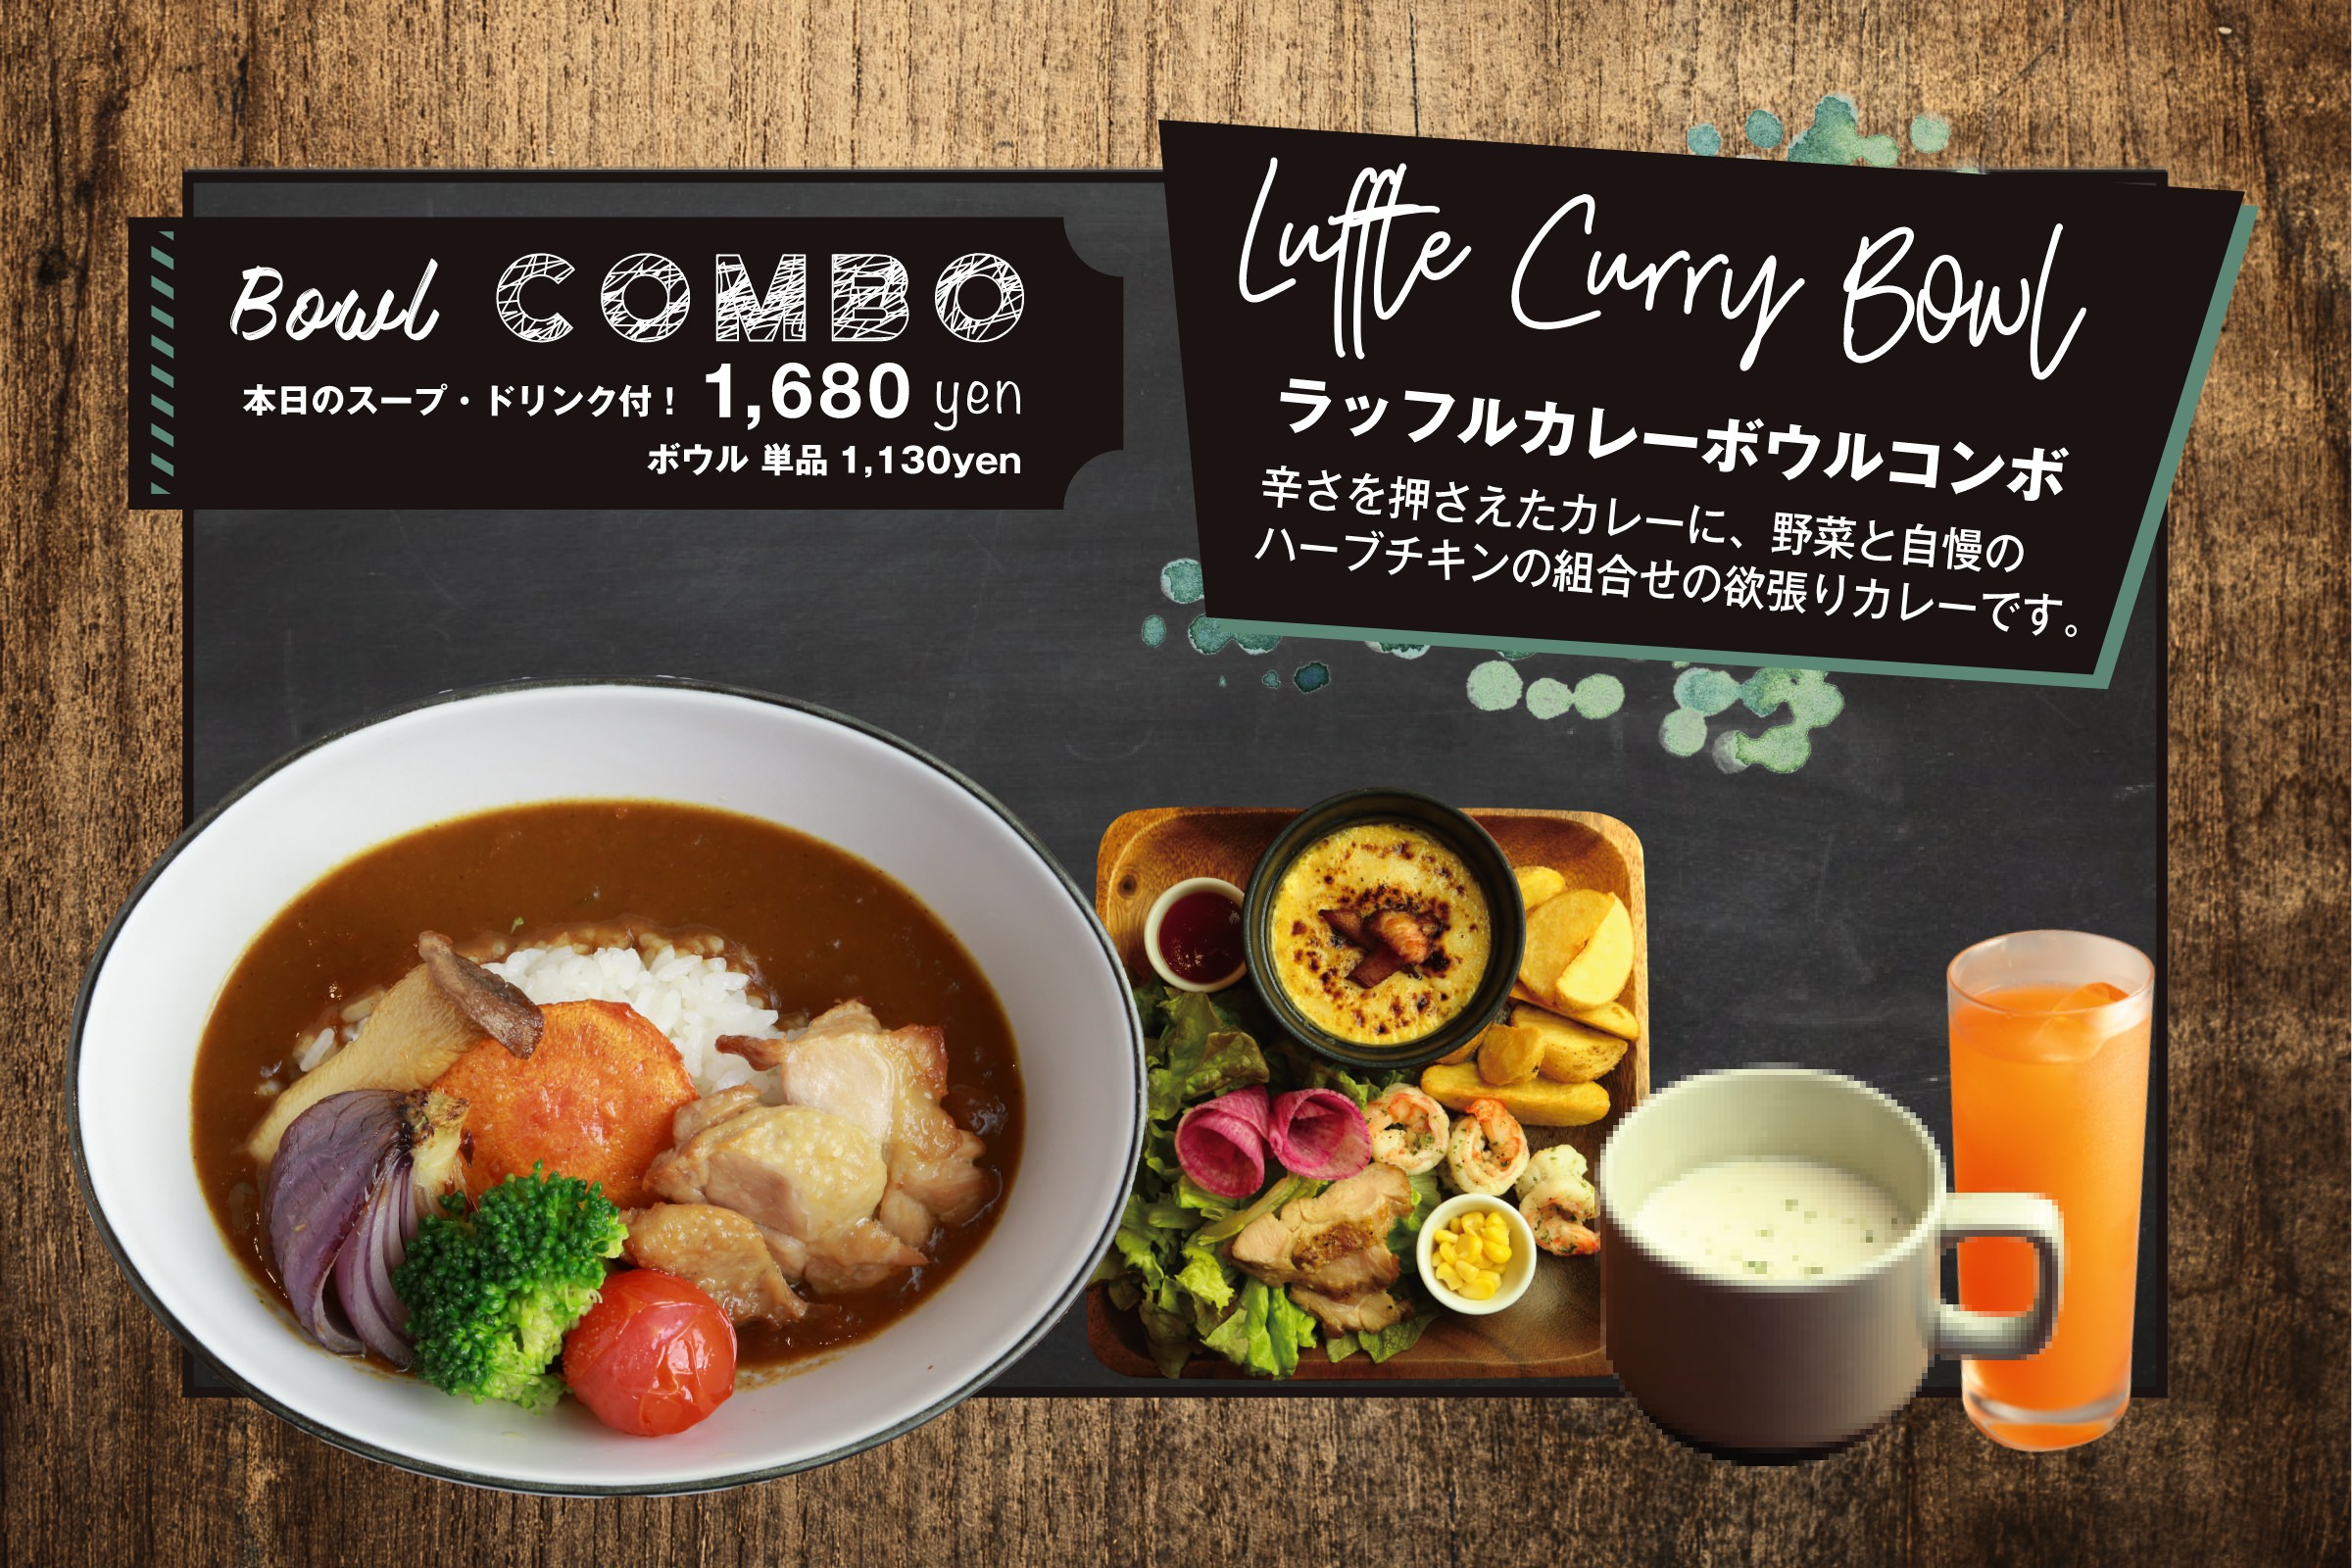 Luffle Curry